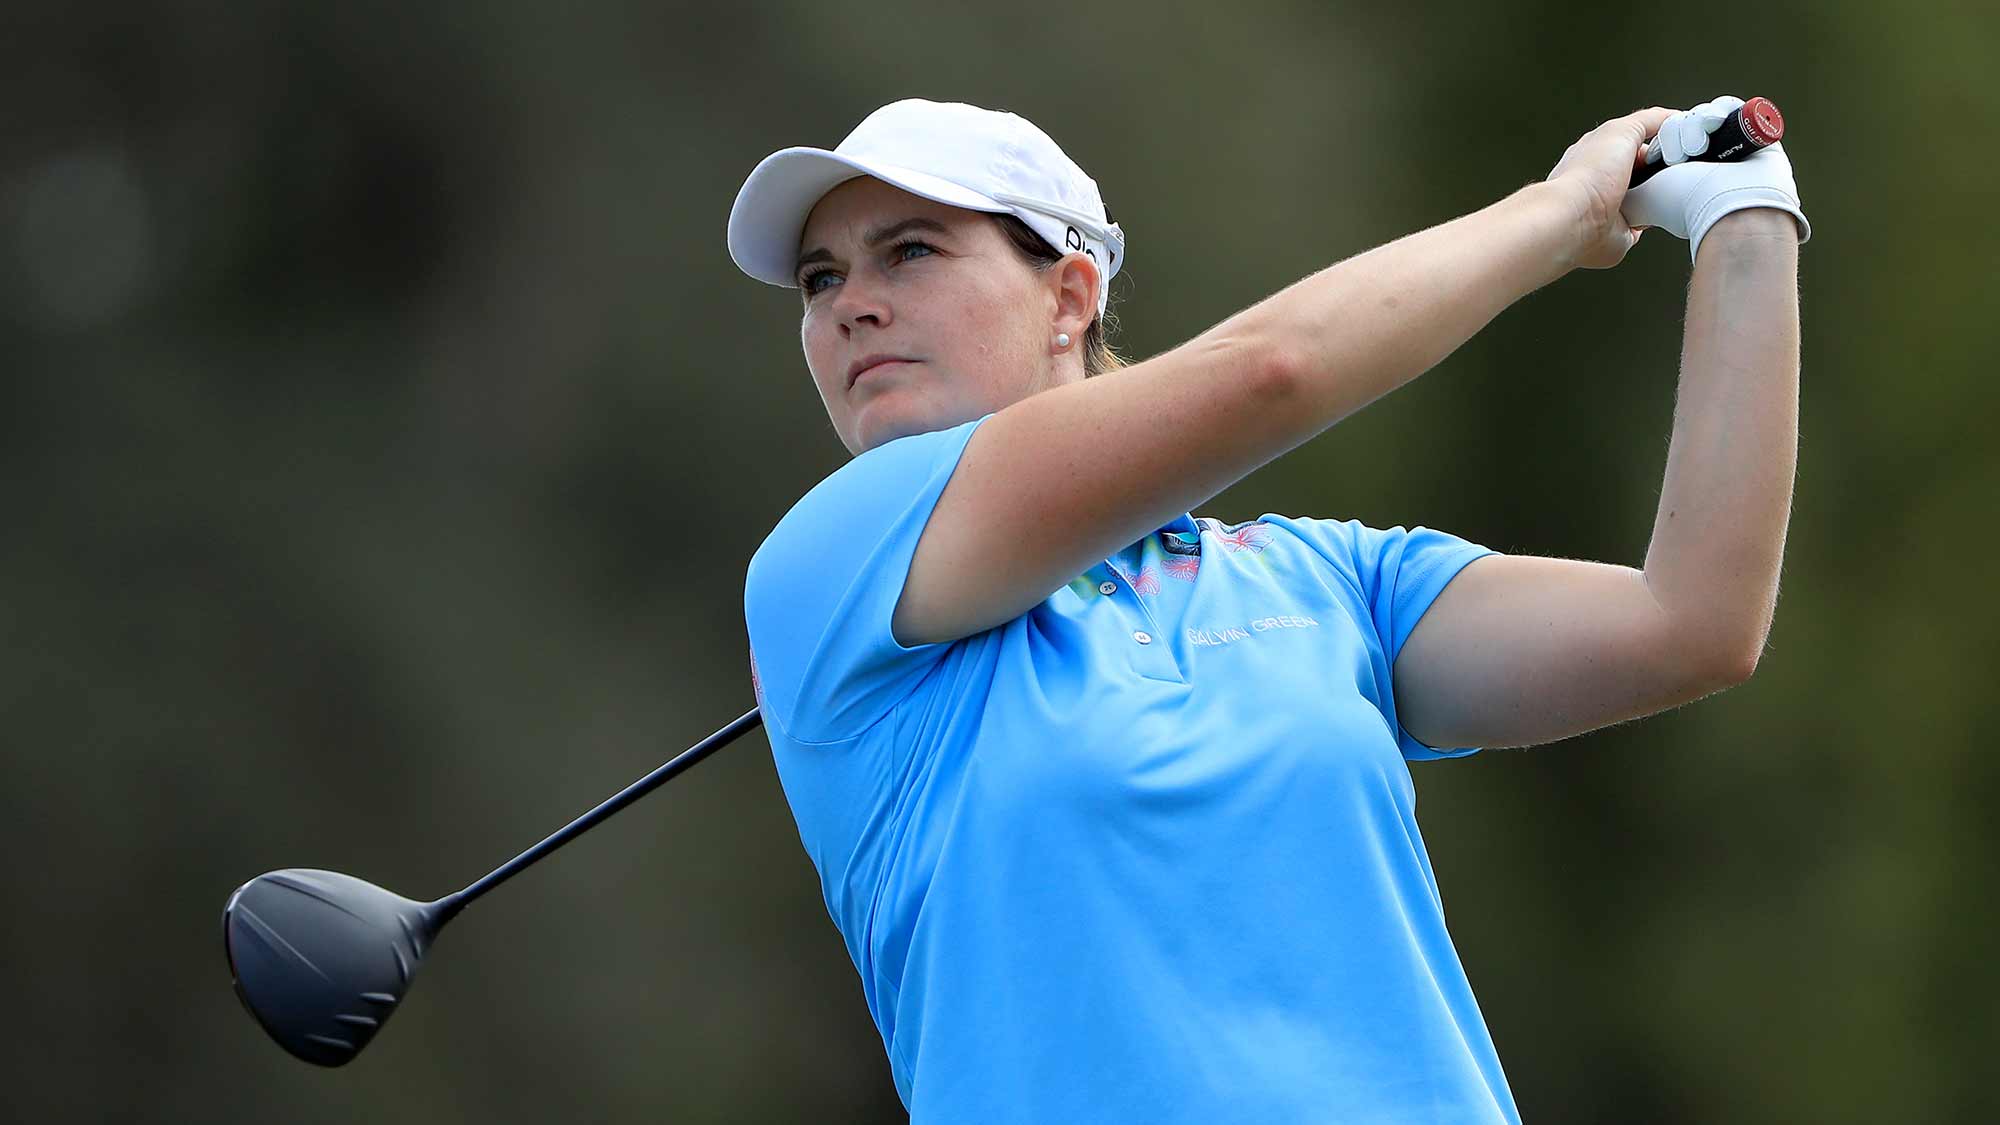 Caroline Masson of Germany plays a shot on the third hole during the third round of the CME Group Tour Championship at Tiburon Golf Club on November 23, 2019 in Naples, Florida